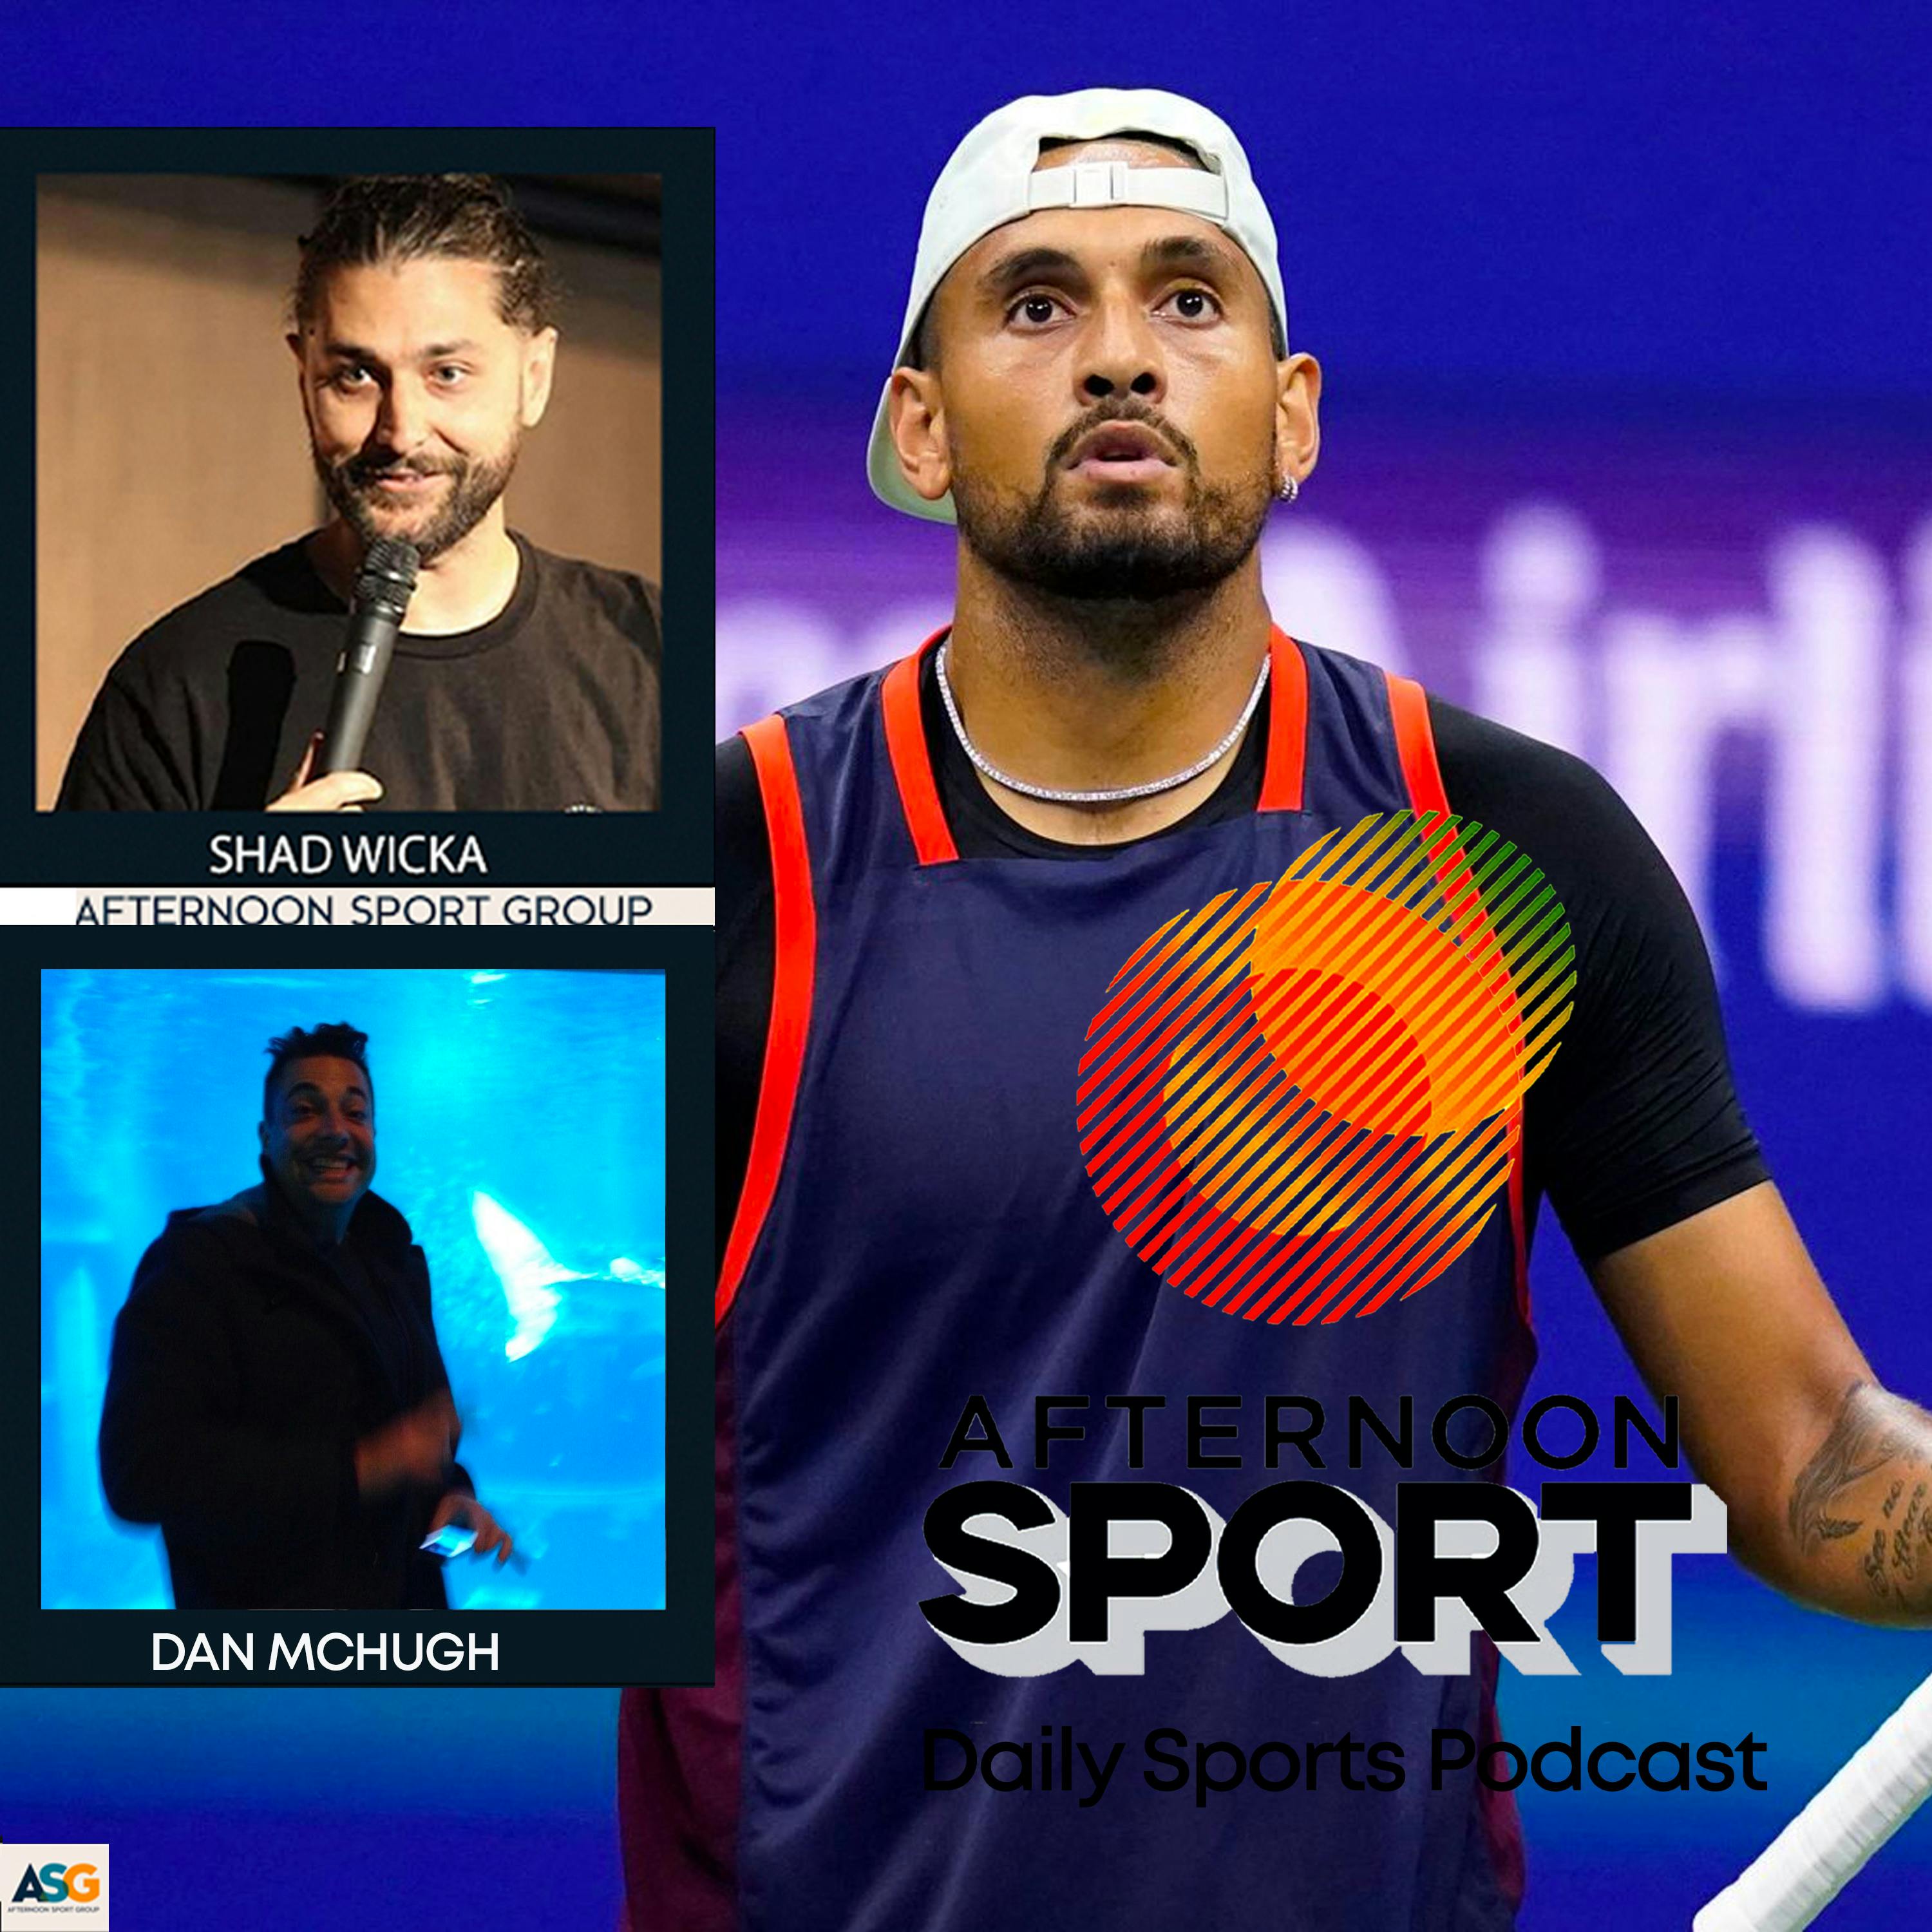 3rd July Shad Wicka & Dan McHugh: No Wimbledon for Nick Kyrgios, Women’s Ashes T20 win, Men win Ashes test 2, Bronze for the Opals, AFL, NRL + more!